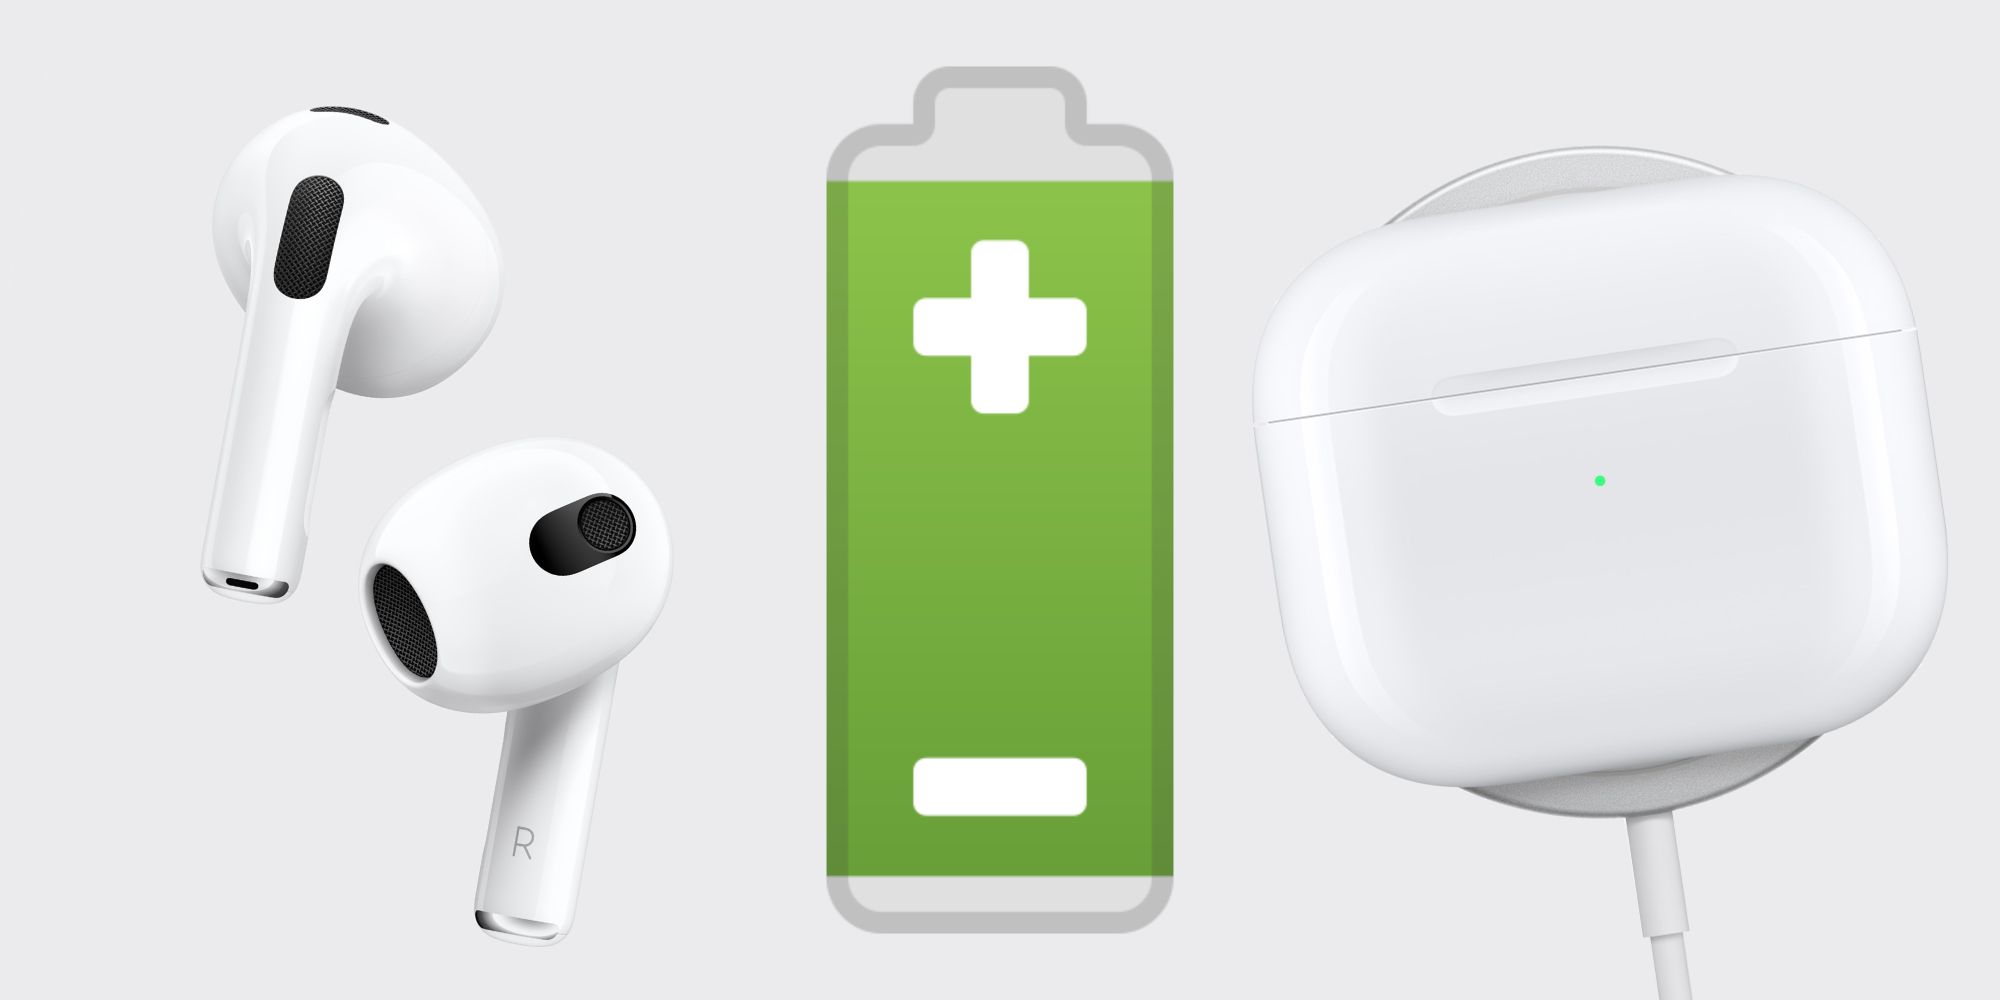 AIRPODS 3. AIRPODS 1 поколение. Аккумулятор наушники AIRPODS 2. AIRPODS С экраном. Аккумулятор наушники airpods